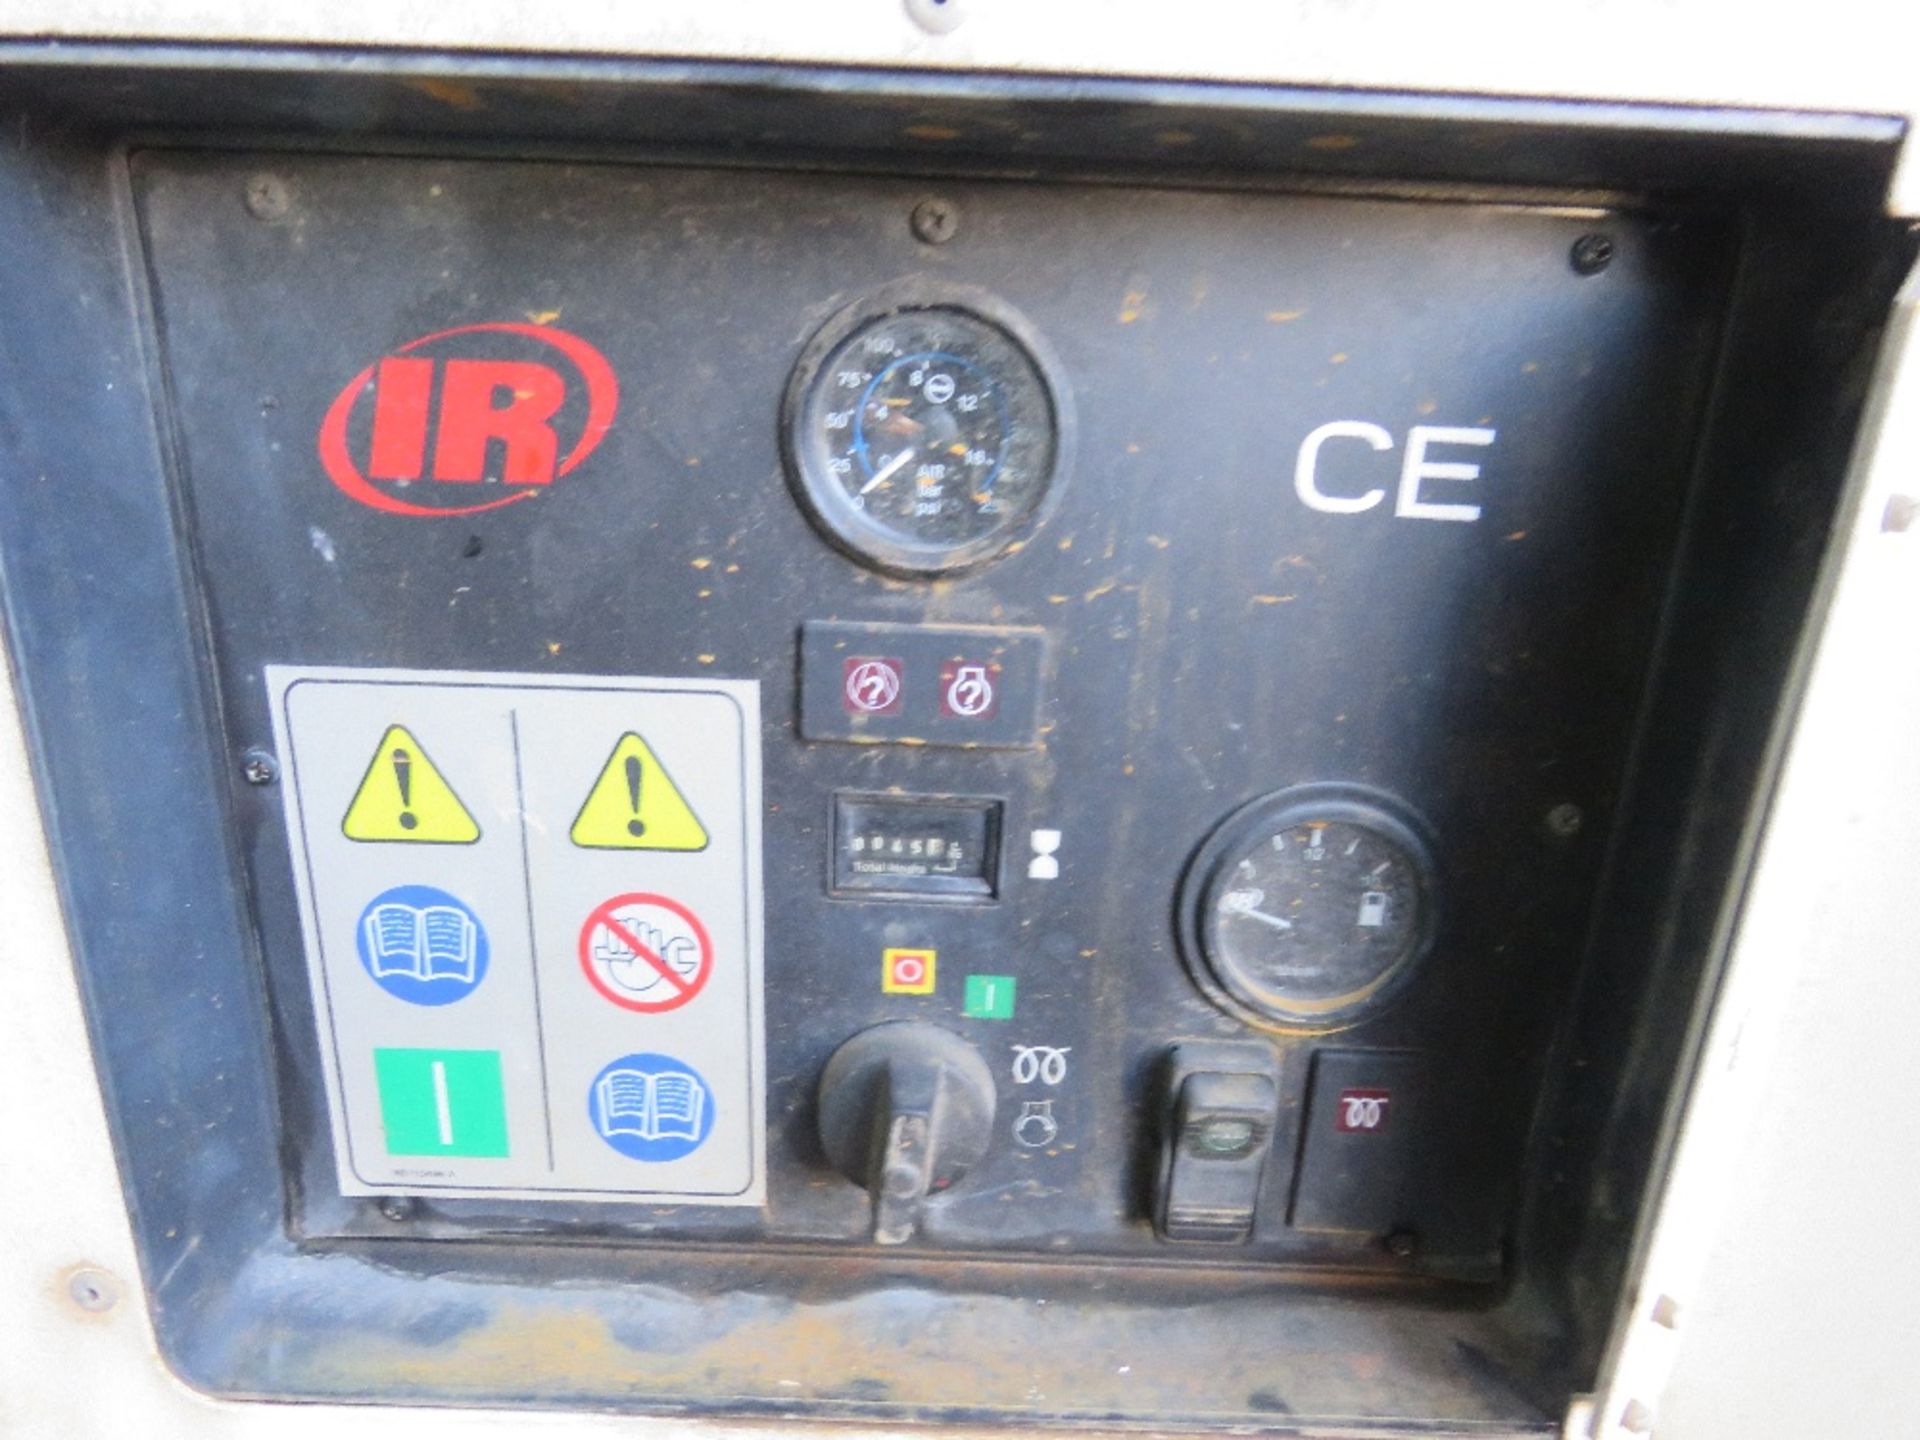 INGERSOLL RAND 8.6 BAR RATED COMPRESSOR. JOHN DEERE ENGINE. YEAR 2004. MODEL: R1300F7170. DIRECT FRO - Image 6 of 8